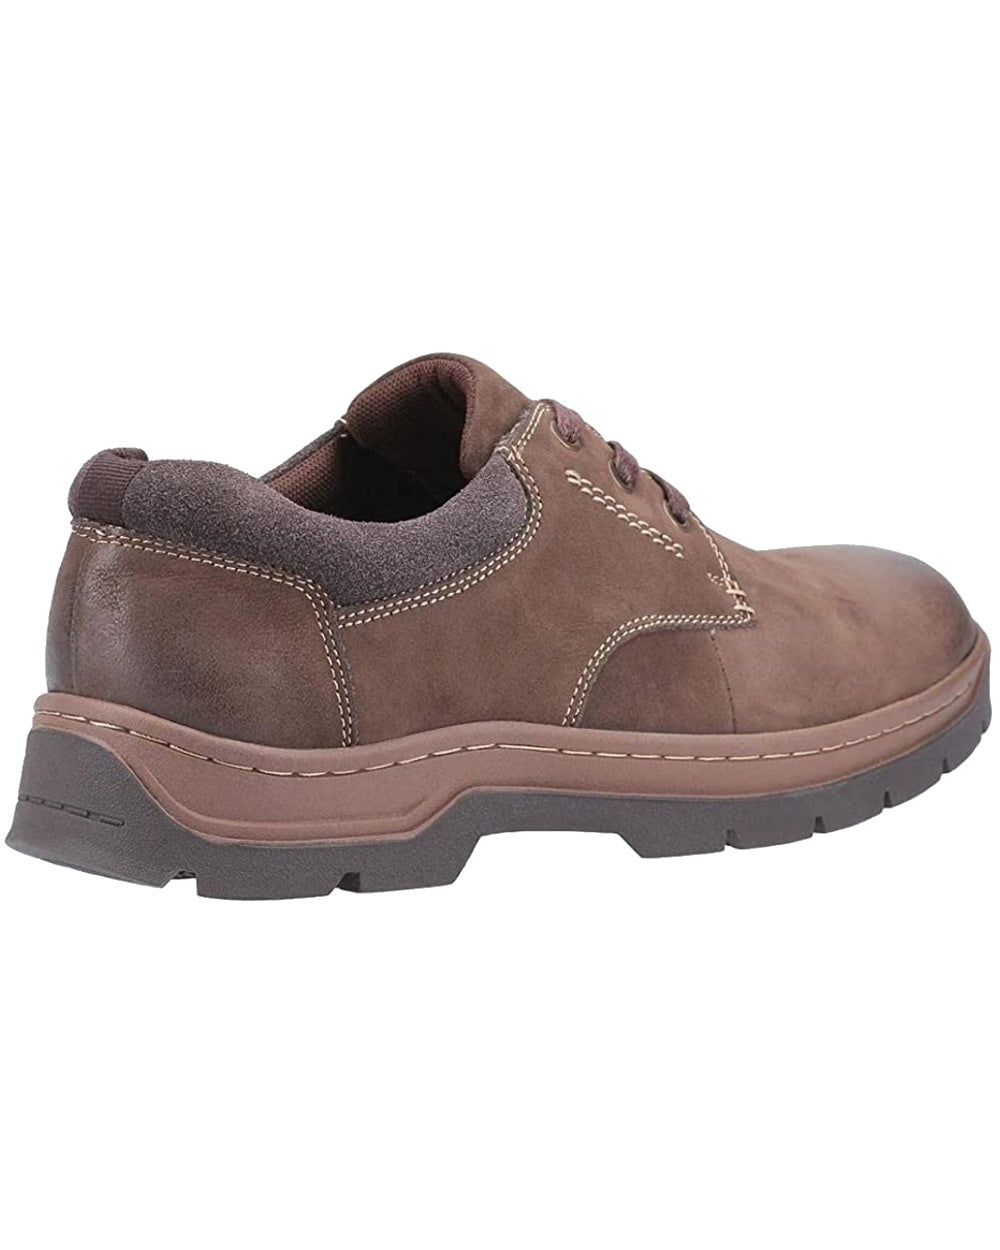 Cotswold Thickwood Burnished Leather Casual Shoes in Brown 